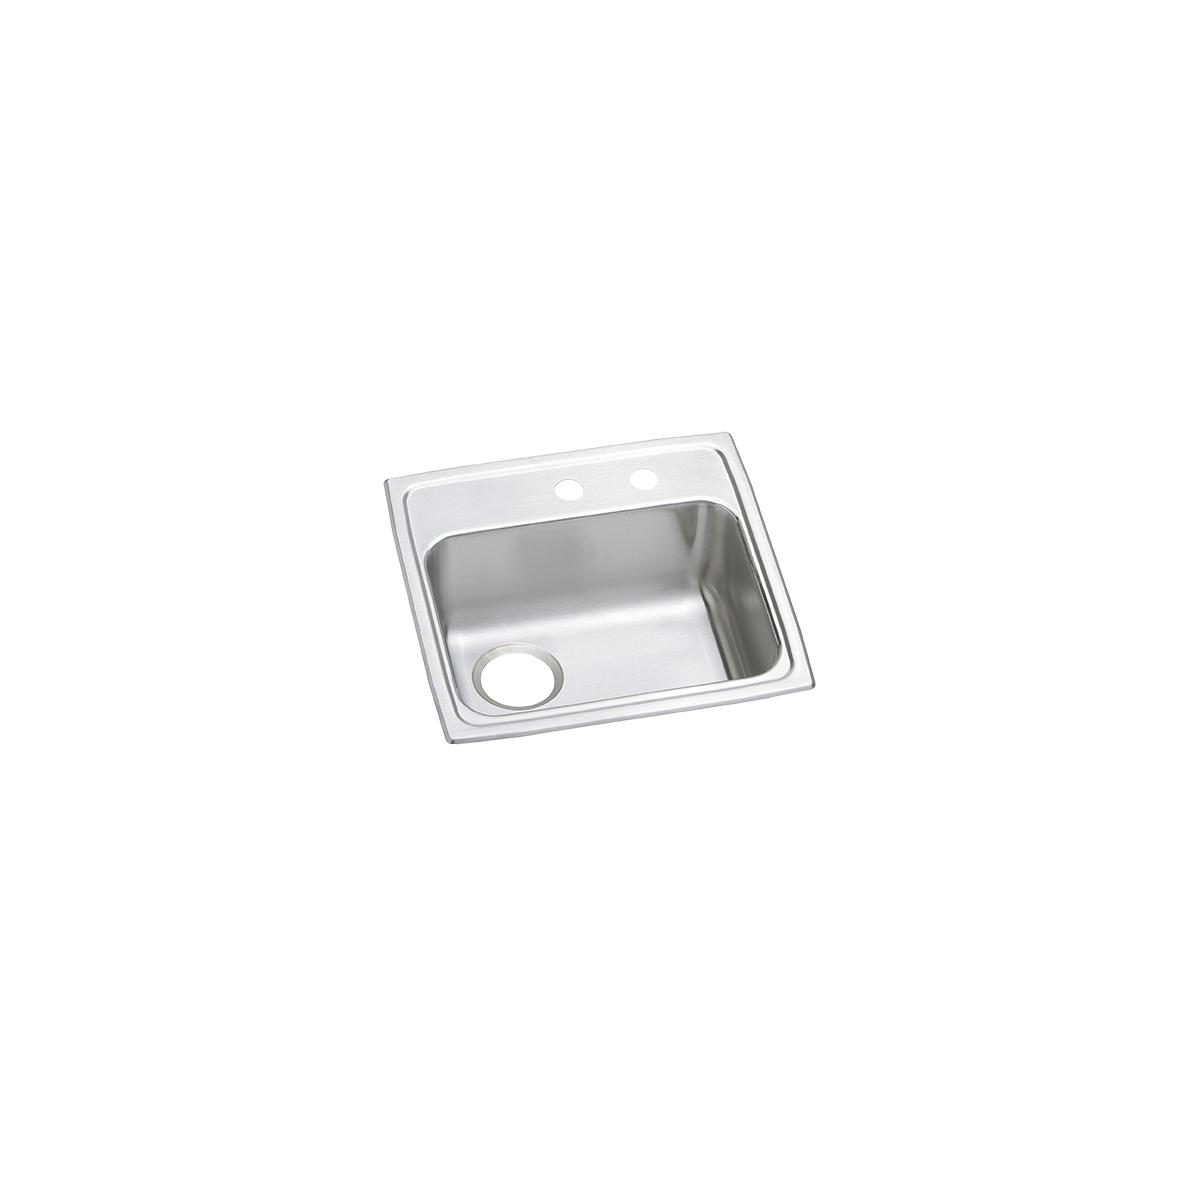 Elkay Celebrity 19-1/2" x 19" x 5-1/2" MR2-Hole Single Bowl Drop-in ADA Sink with Quick-clip and Left Drain